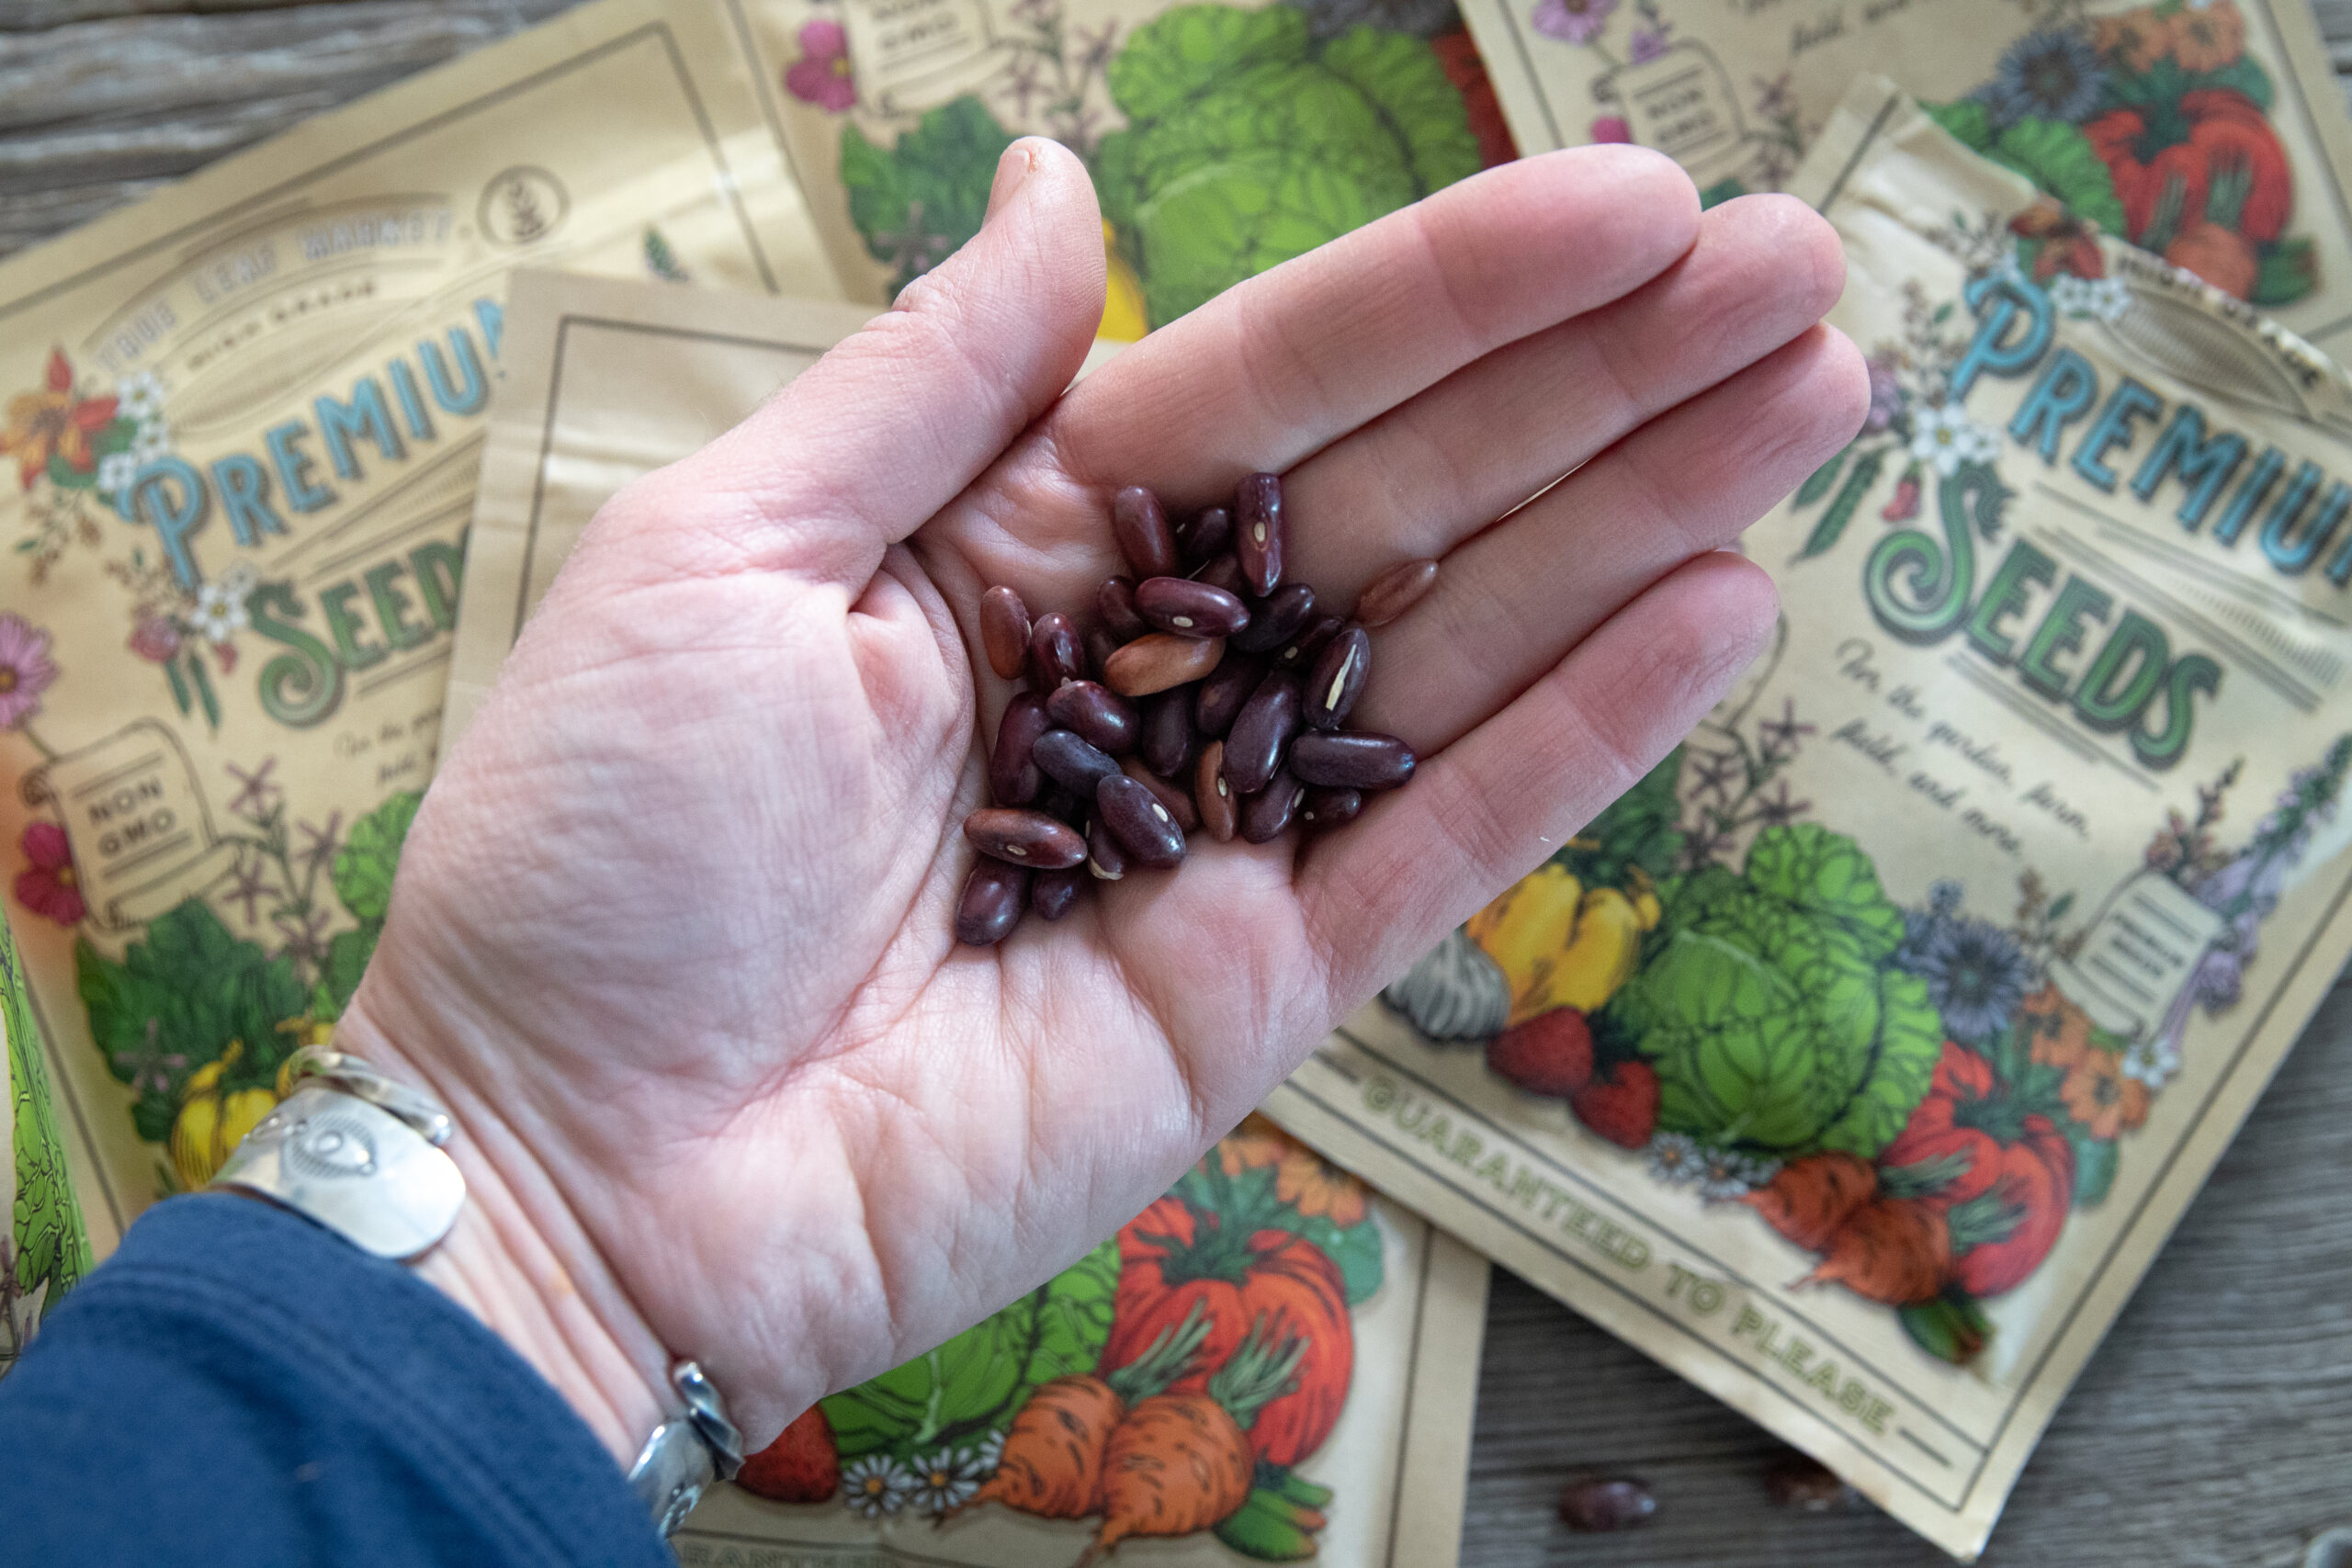 How to Organize Your Seeds